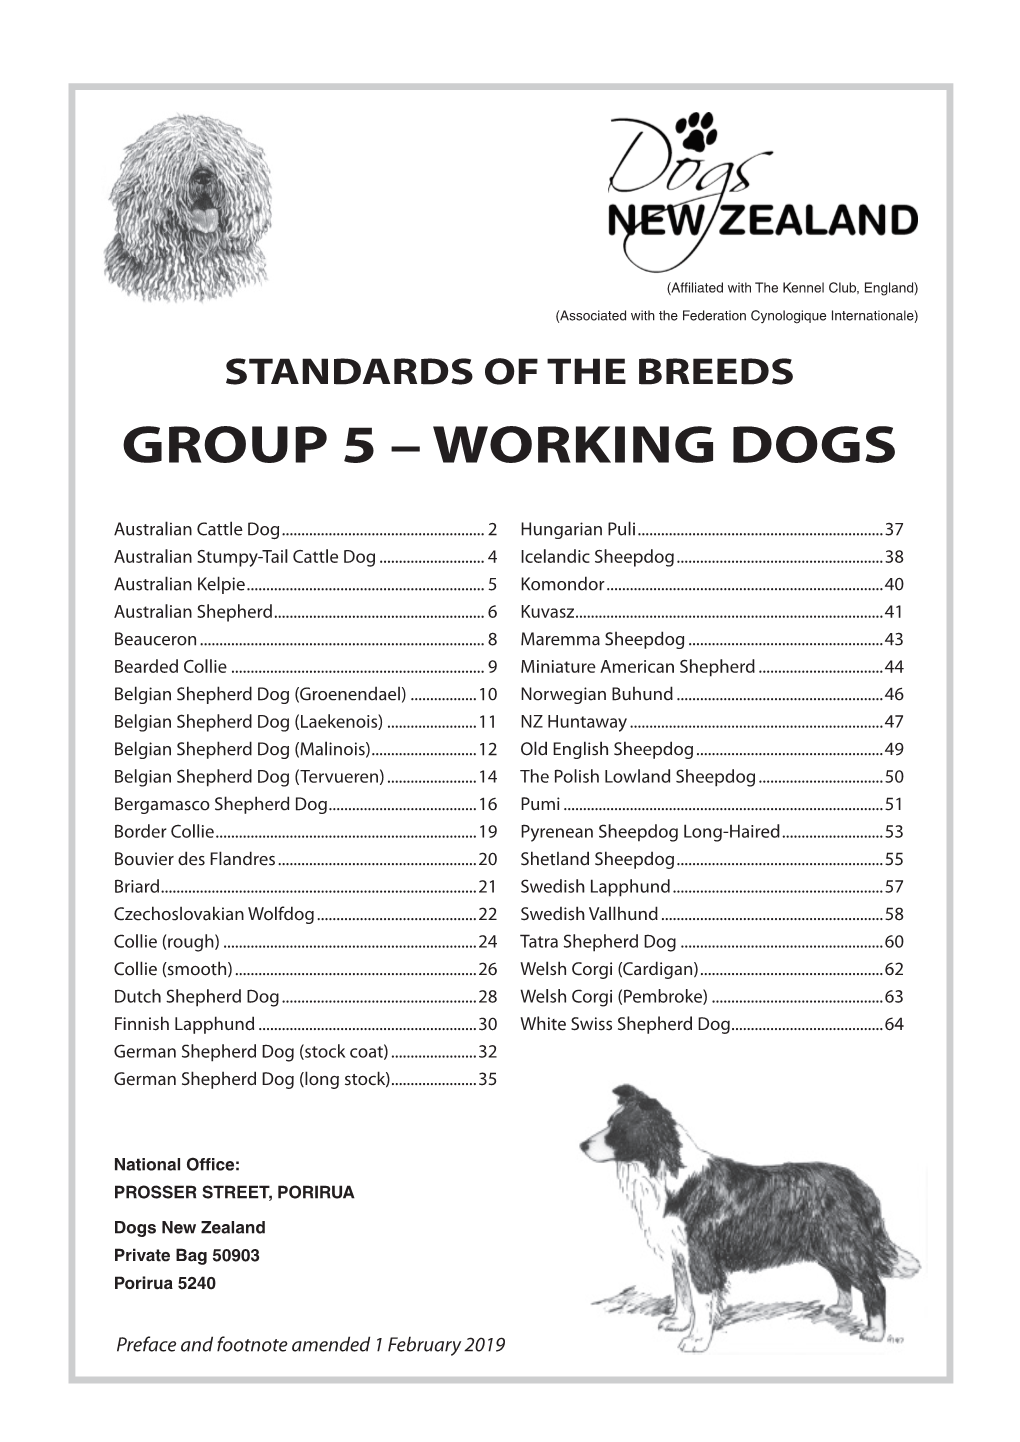 Group 5 – Working Dogs